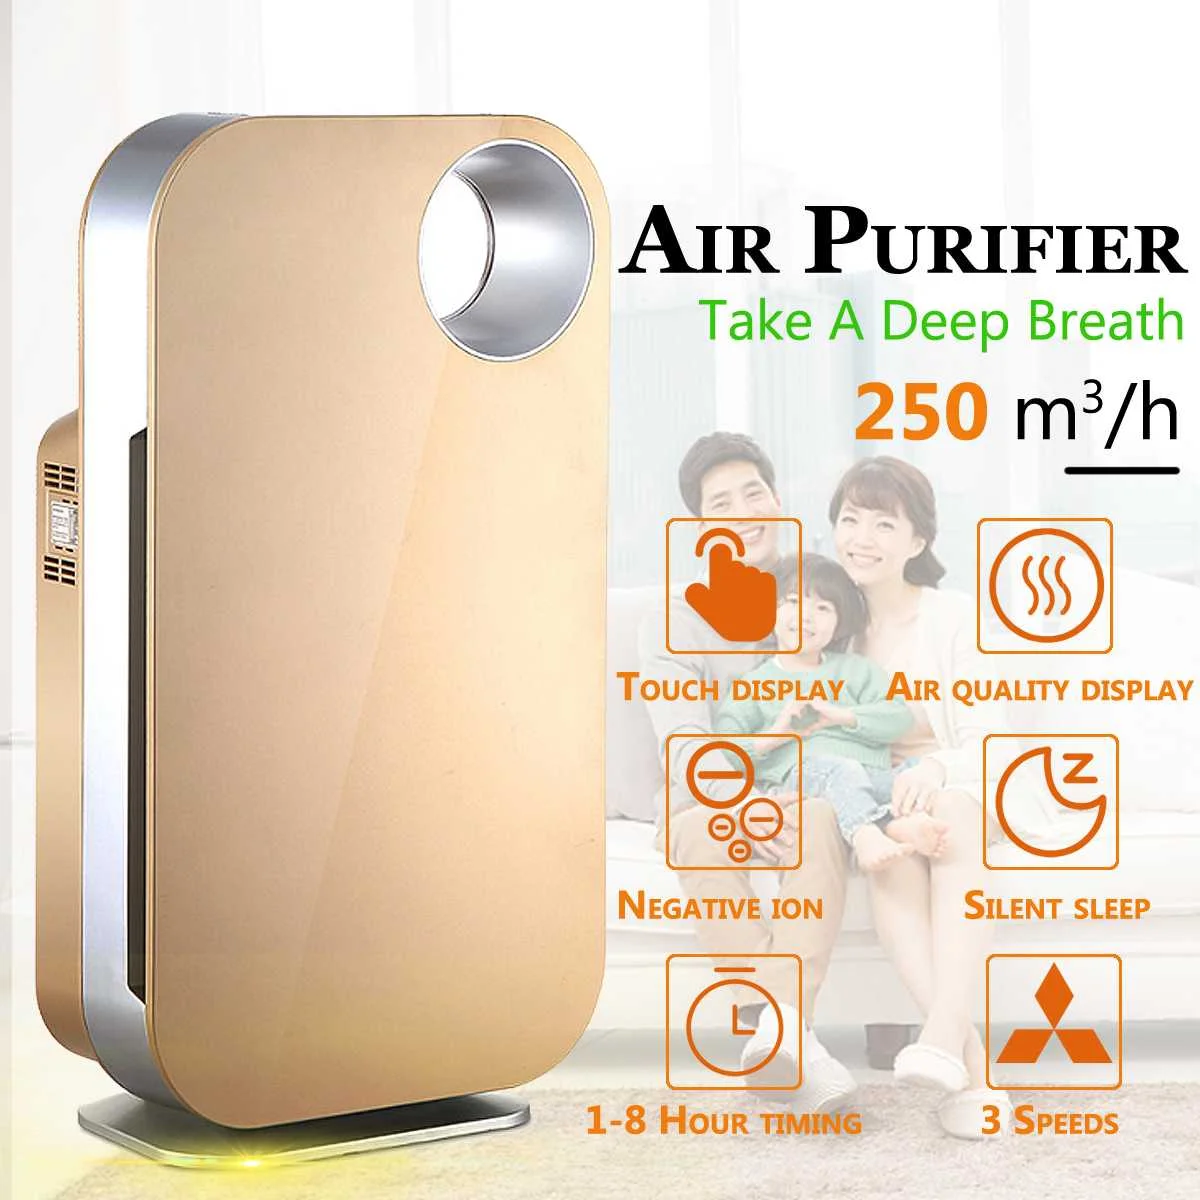 

Home Office Air Purifier with Filter Ozone Generator Ionizer For Smoke Home Pets Air Cleaner Formaldehyde PM2.5 Dust Remover